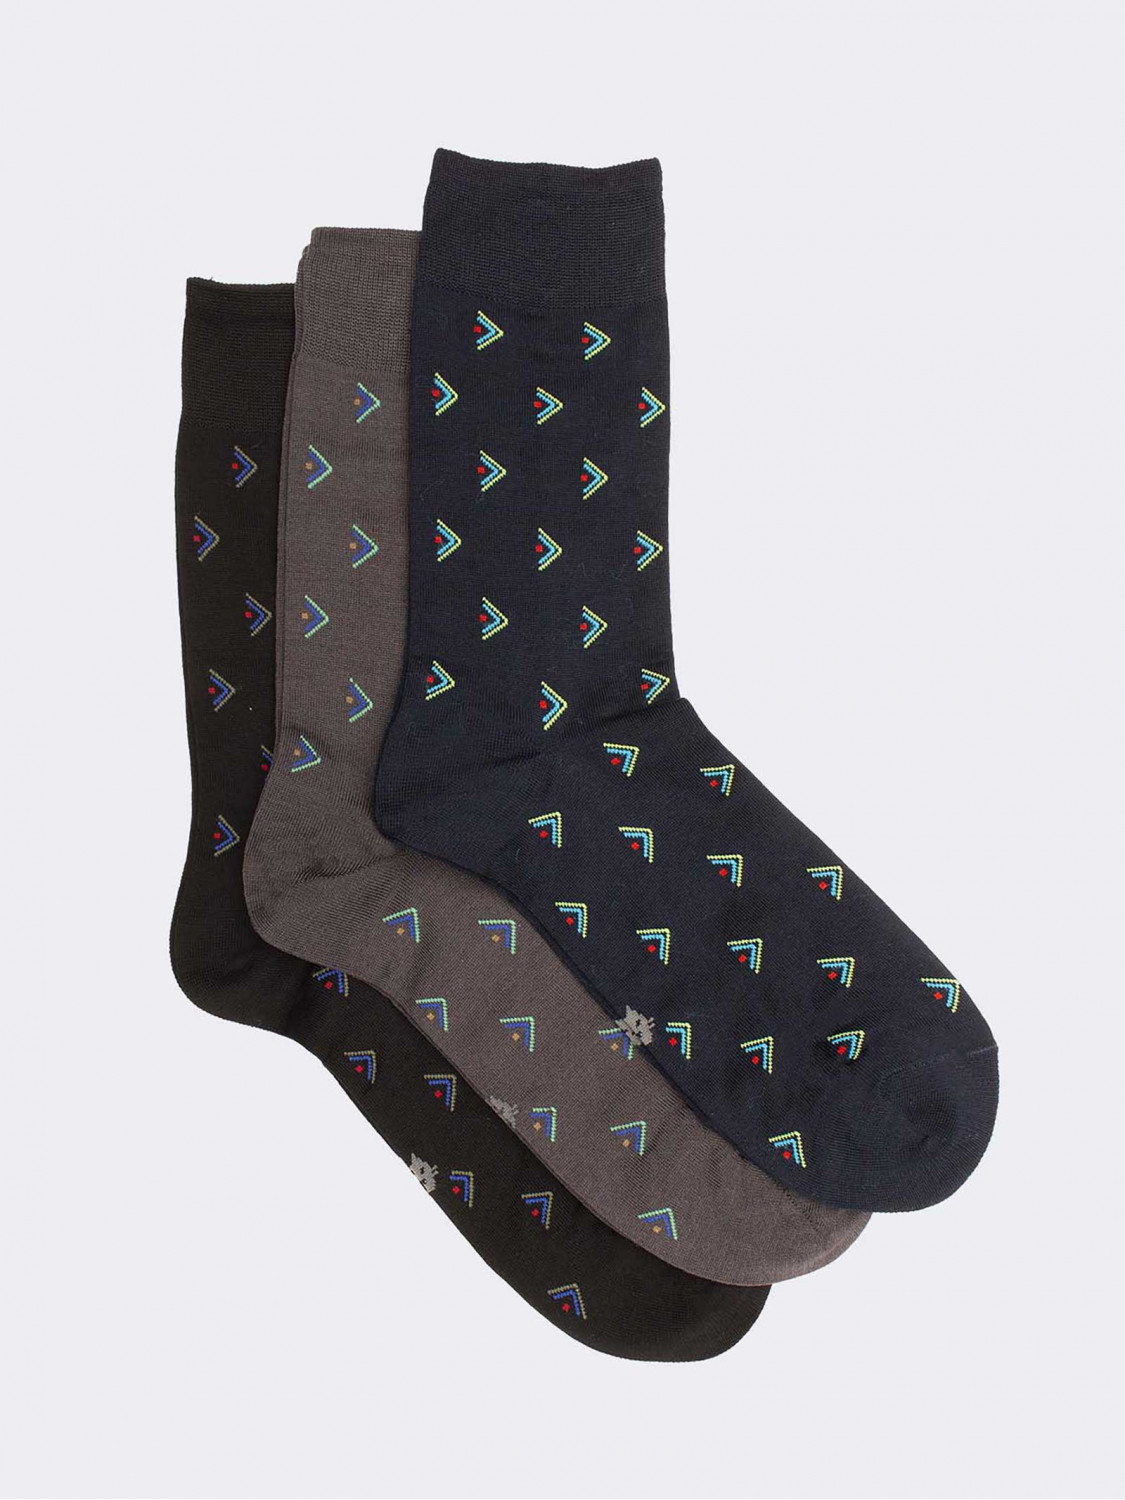 Tris Men’s geometric patterned stockings in cool Cotton